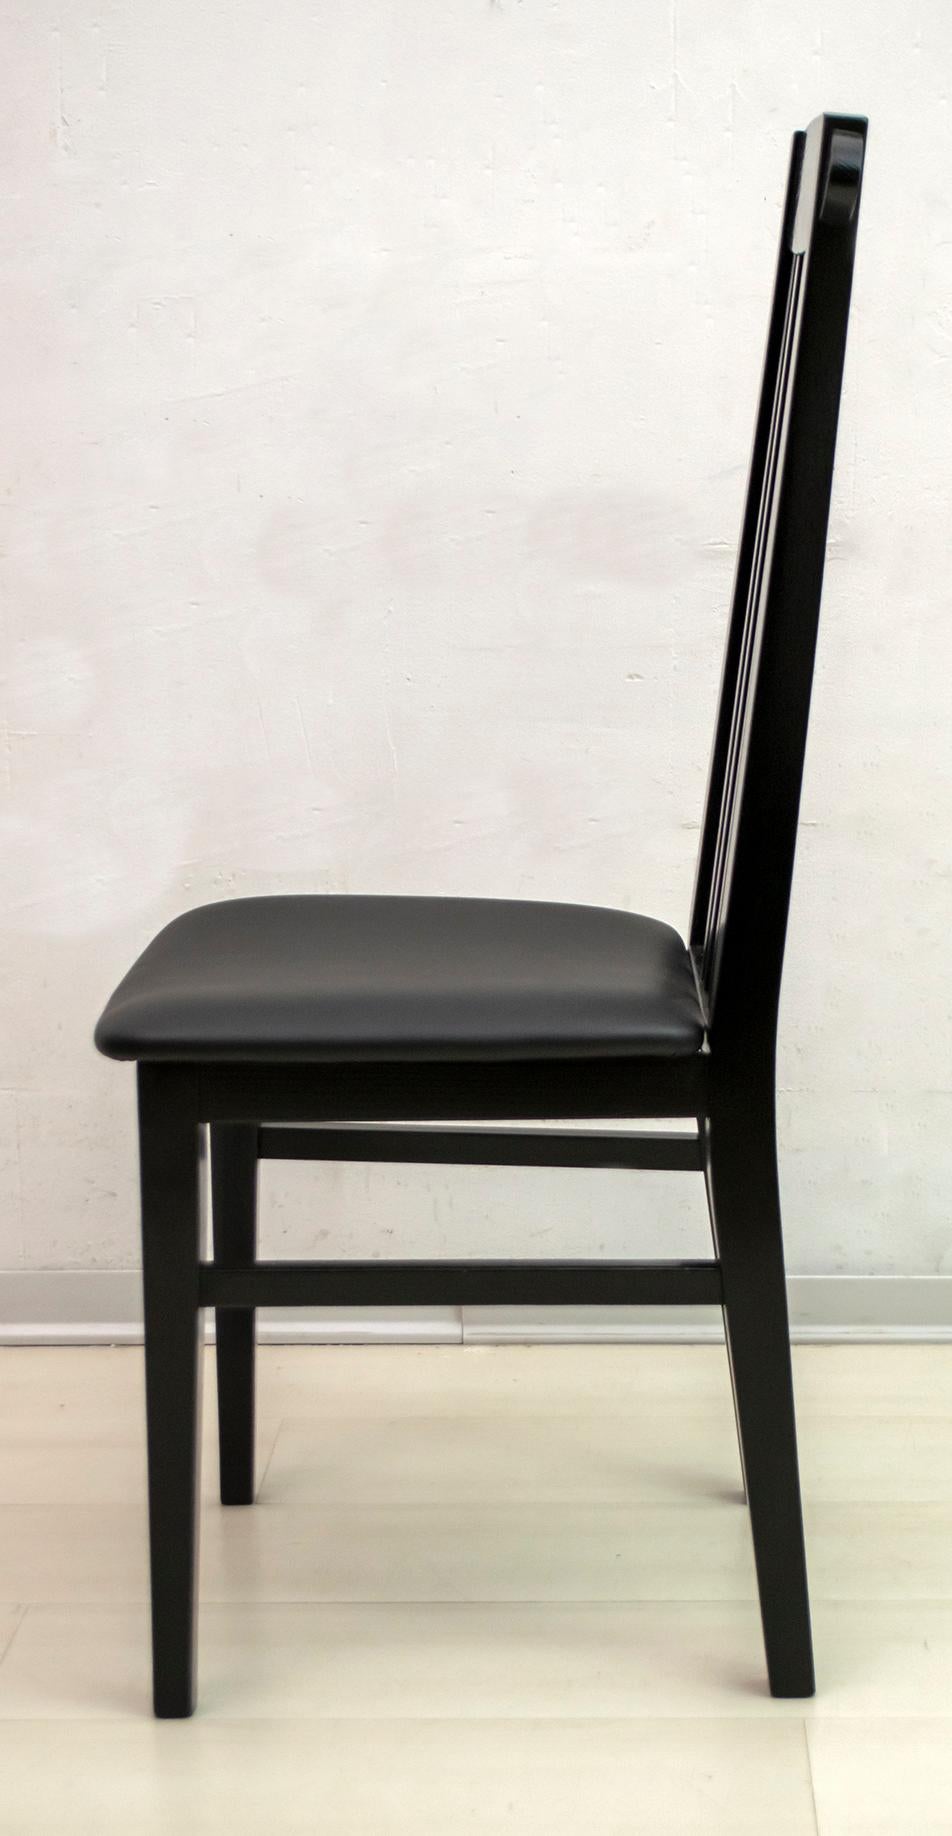 Leather After Charles Rennie Mackintosh 6 Black Lacquered High-Backed Chairs, 1979